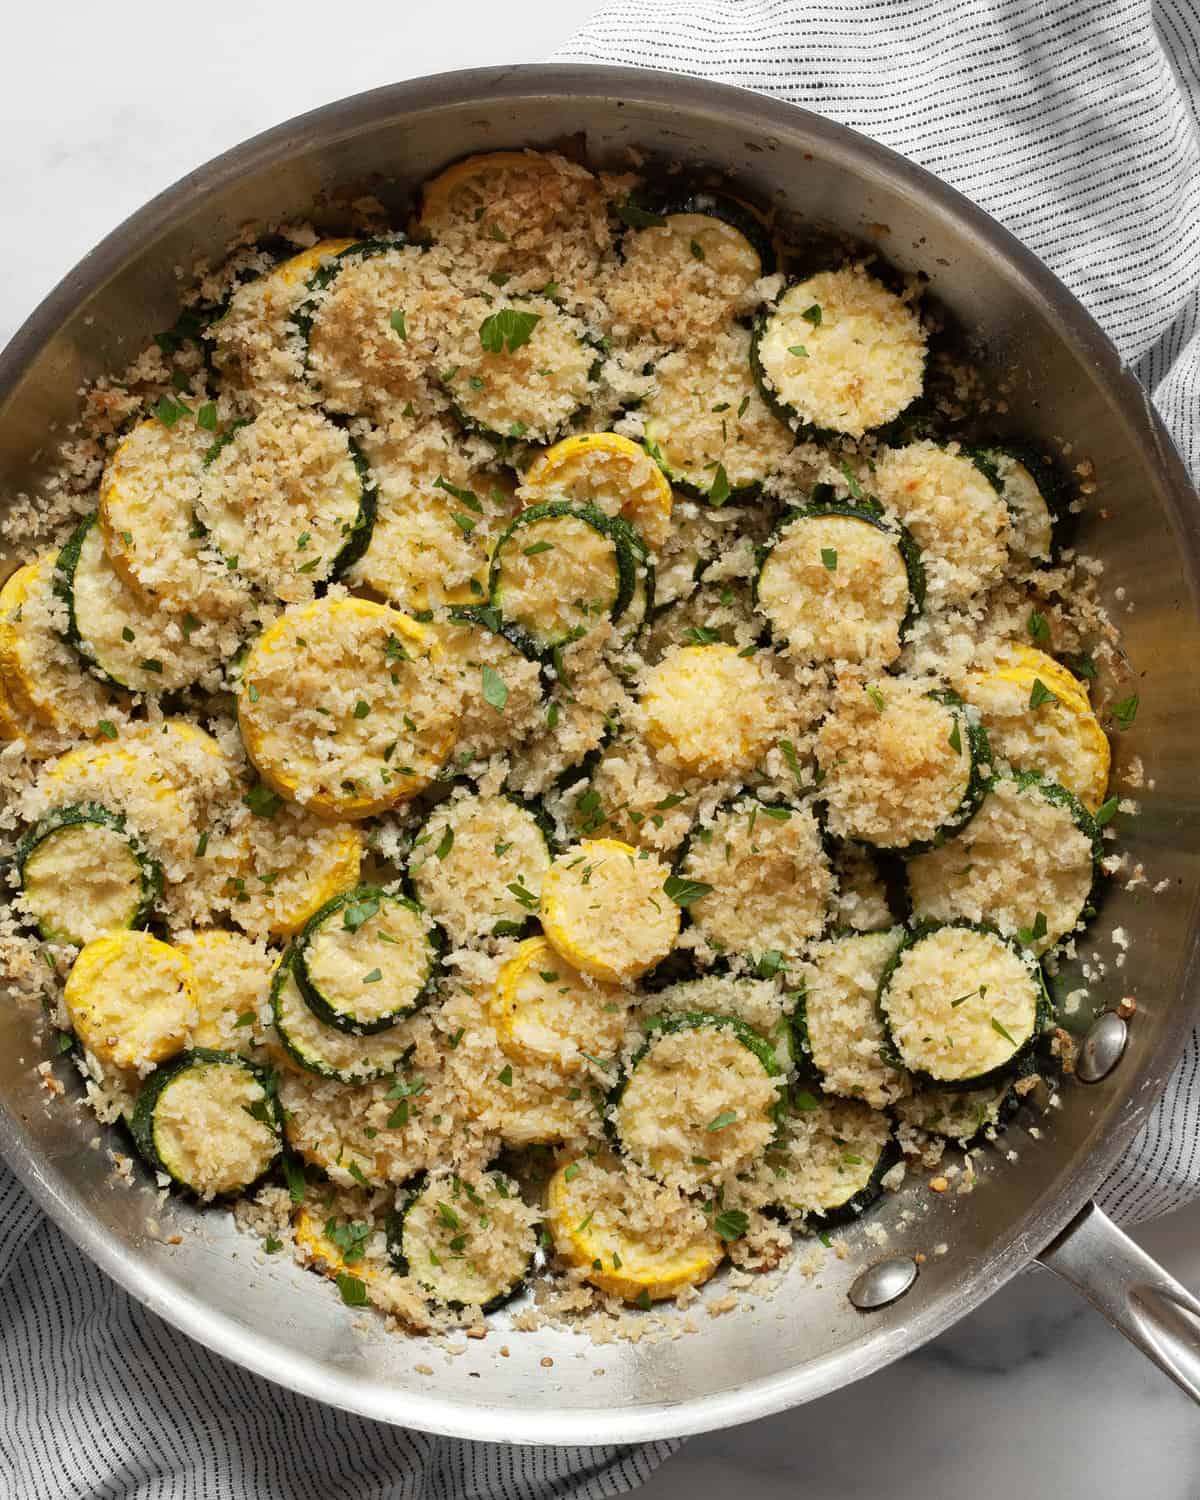 Zucchini and yellow squash casserole baked in a skillet.